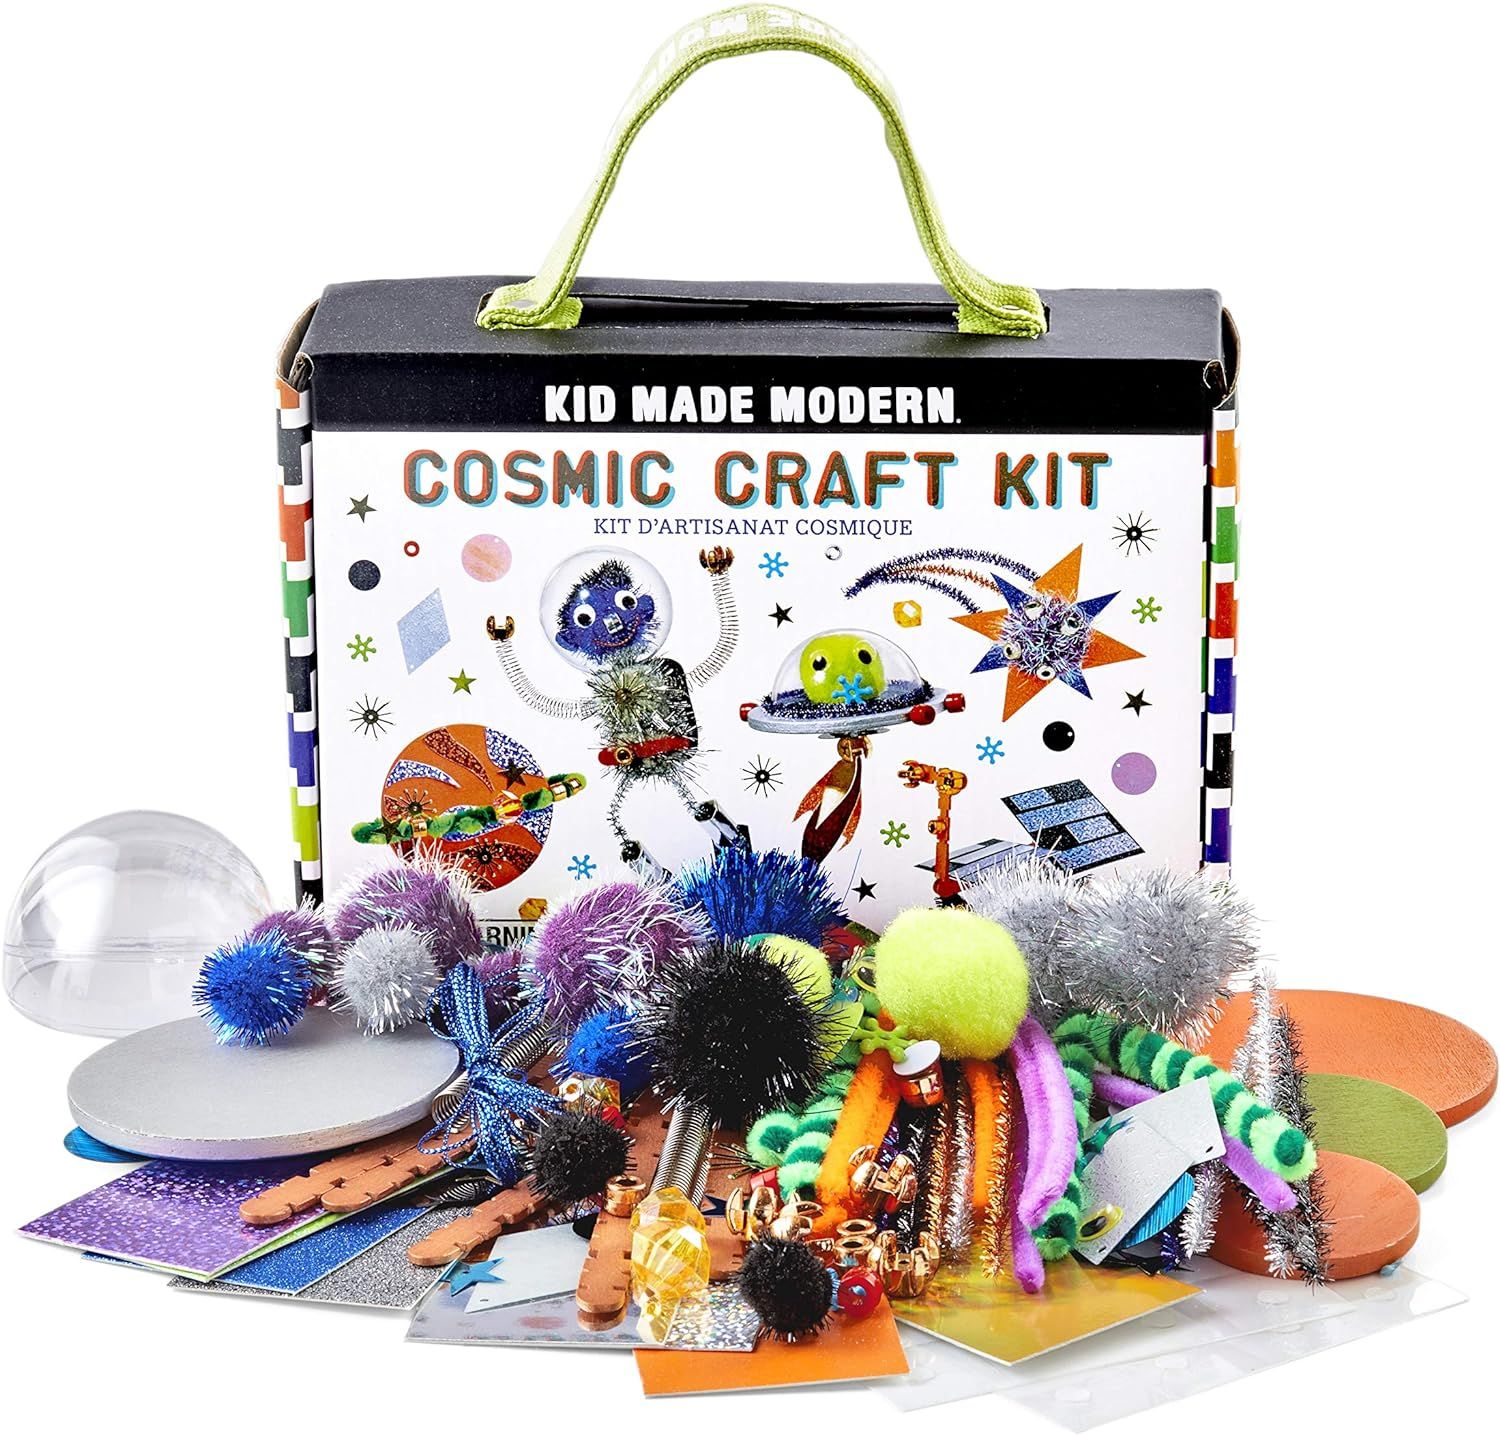 Crafts for Kids - Kid Made Modern Cosmic Craft Kit - Outer Space Toy Building Art Supplies | Amazon (US)